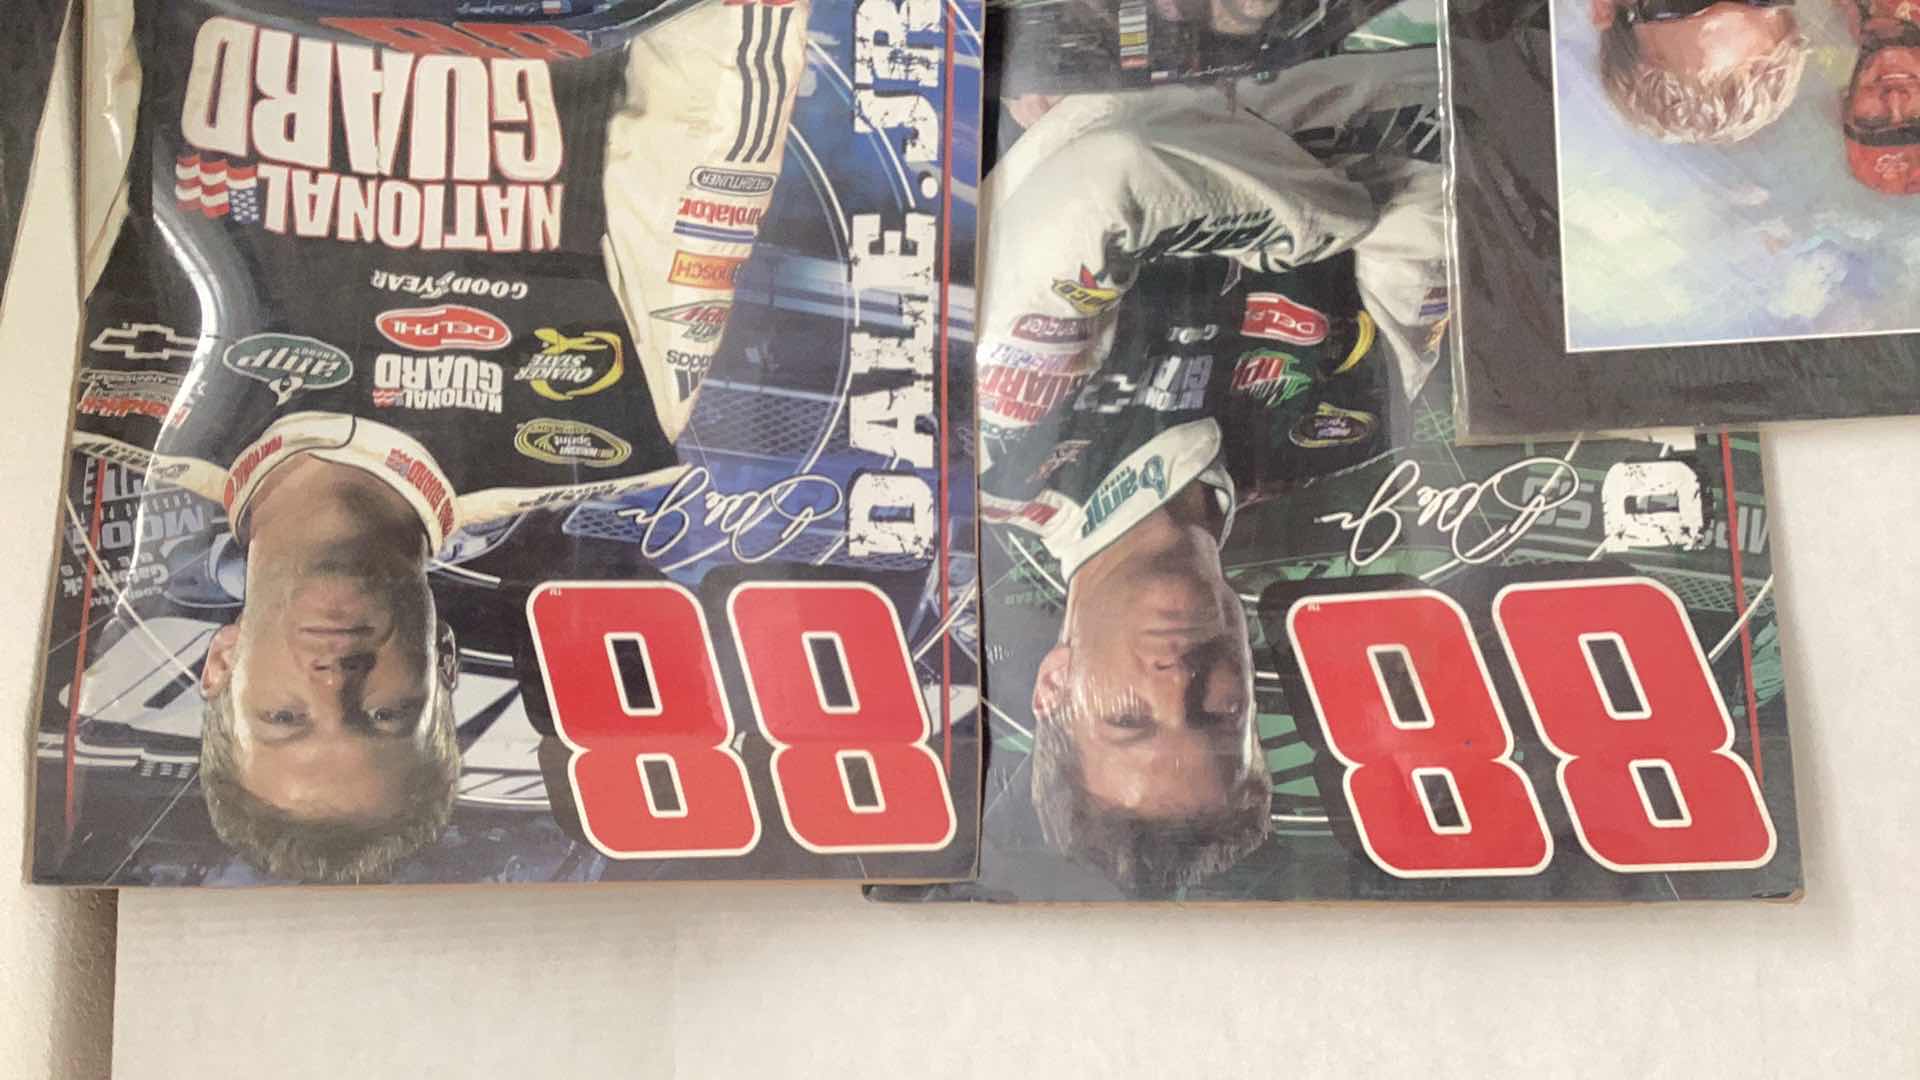 Photo 2 of NASCAR FOUR DALE EARNHARDT JR. POSTER AND PRINTS 20” X H 30”